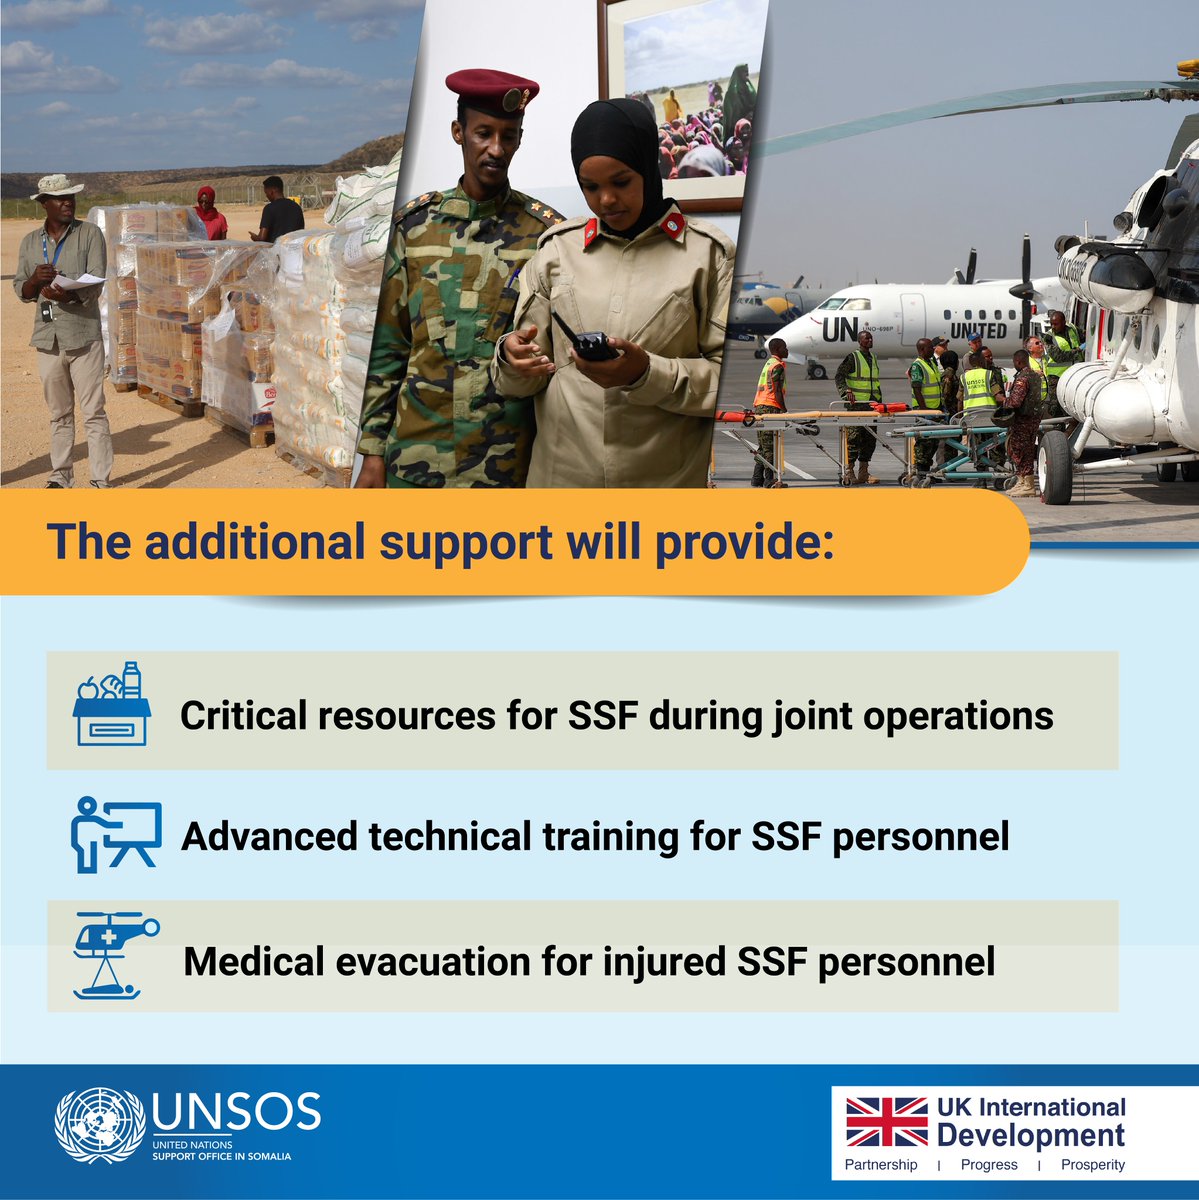 The latest round of @UKinSomalia support will help meet critical logistical needs of #SSF and enhance effective operations in stabilising #Somalia. This support not only strengthens the troops’ capabilities but also institutions to help restore peace, and respect for the rule…